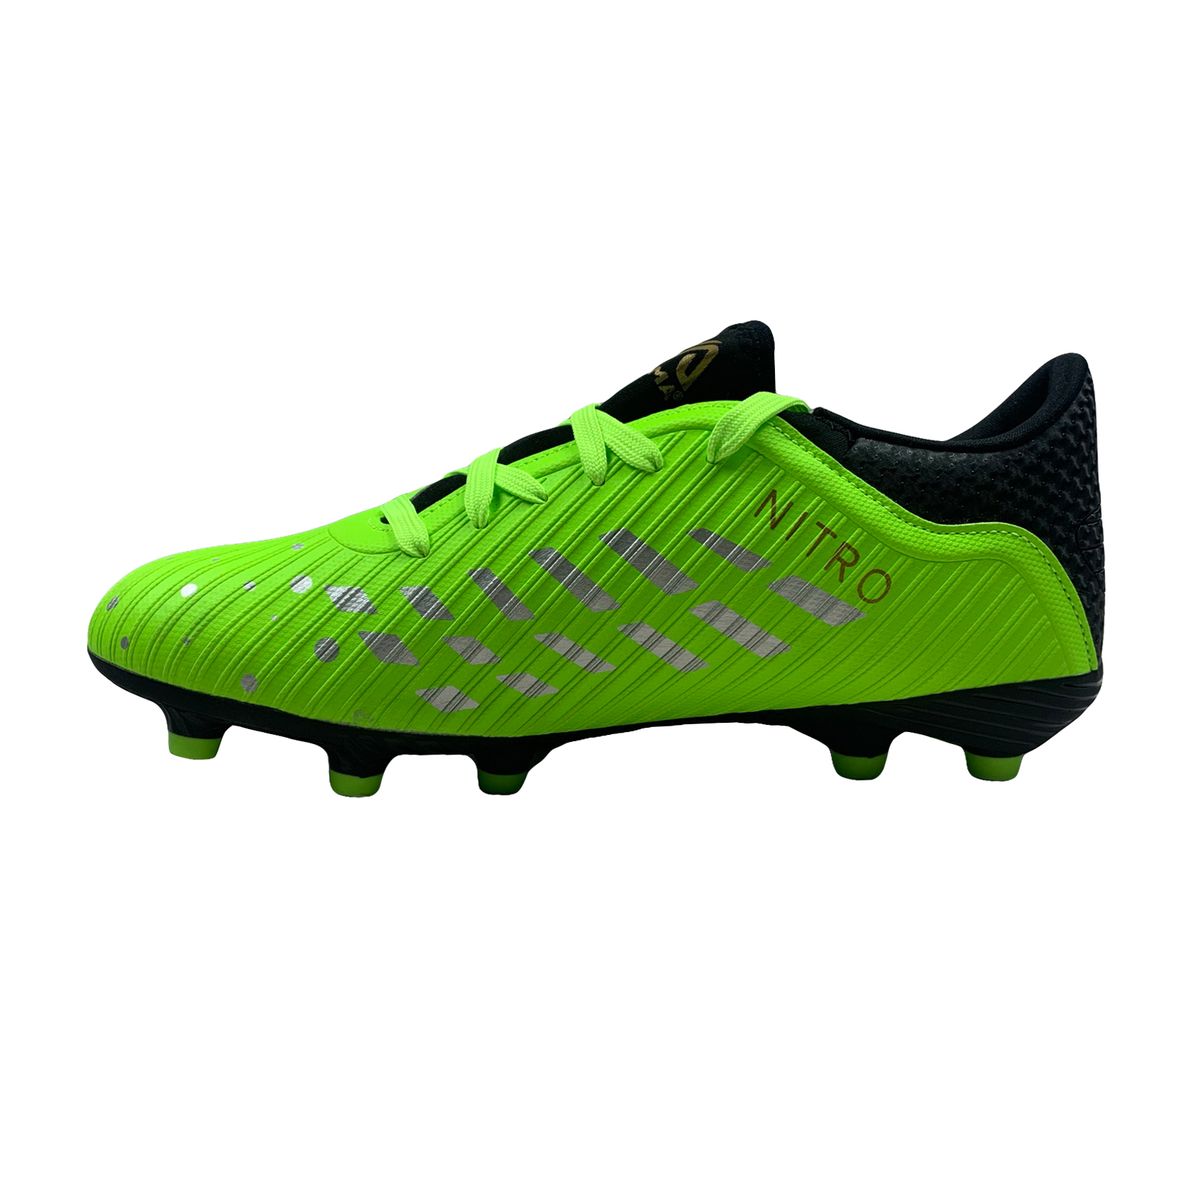 Mitzuma Nitro 8.2 Firm Ground Soccer Boots | Shop Today. Get it ...